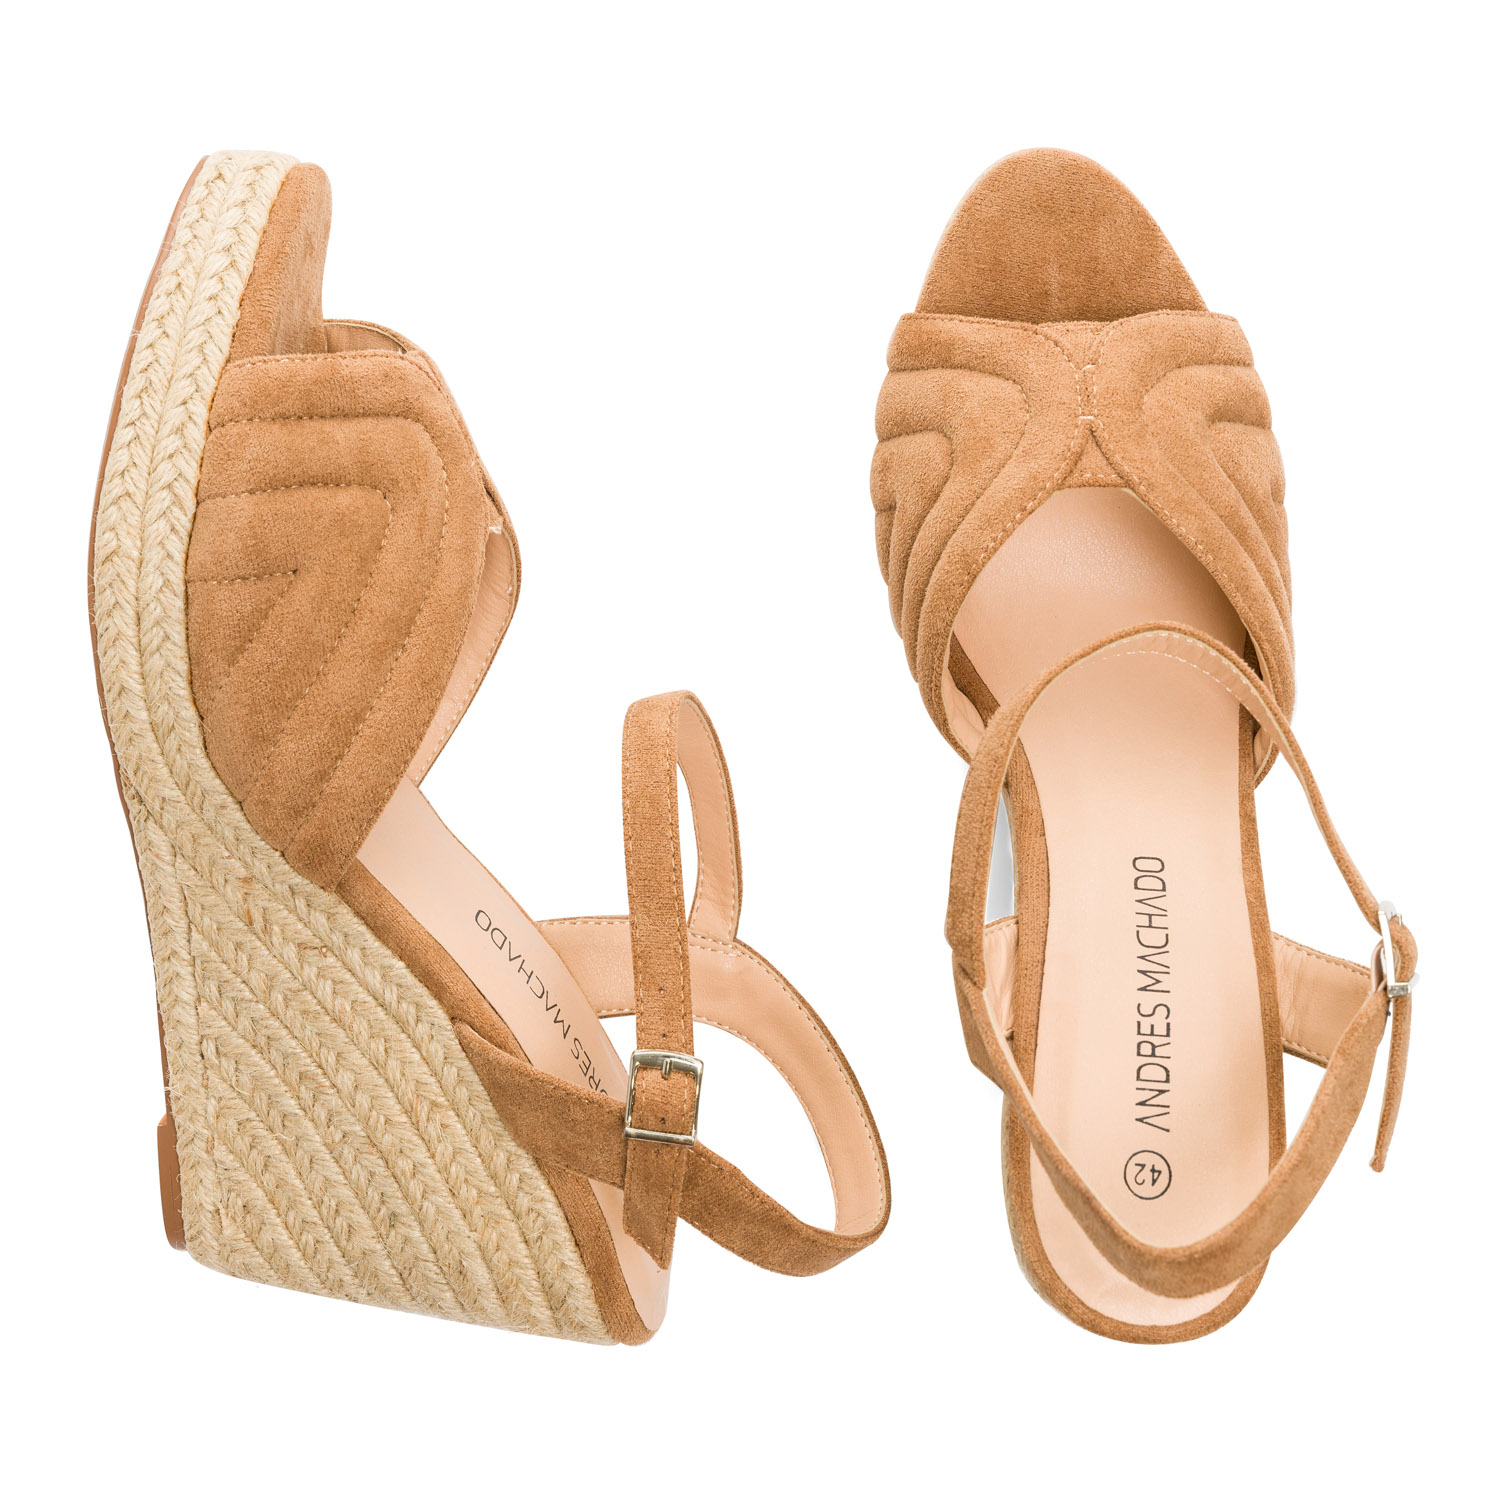 Camel faux suede espadrilles with jute wedge 